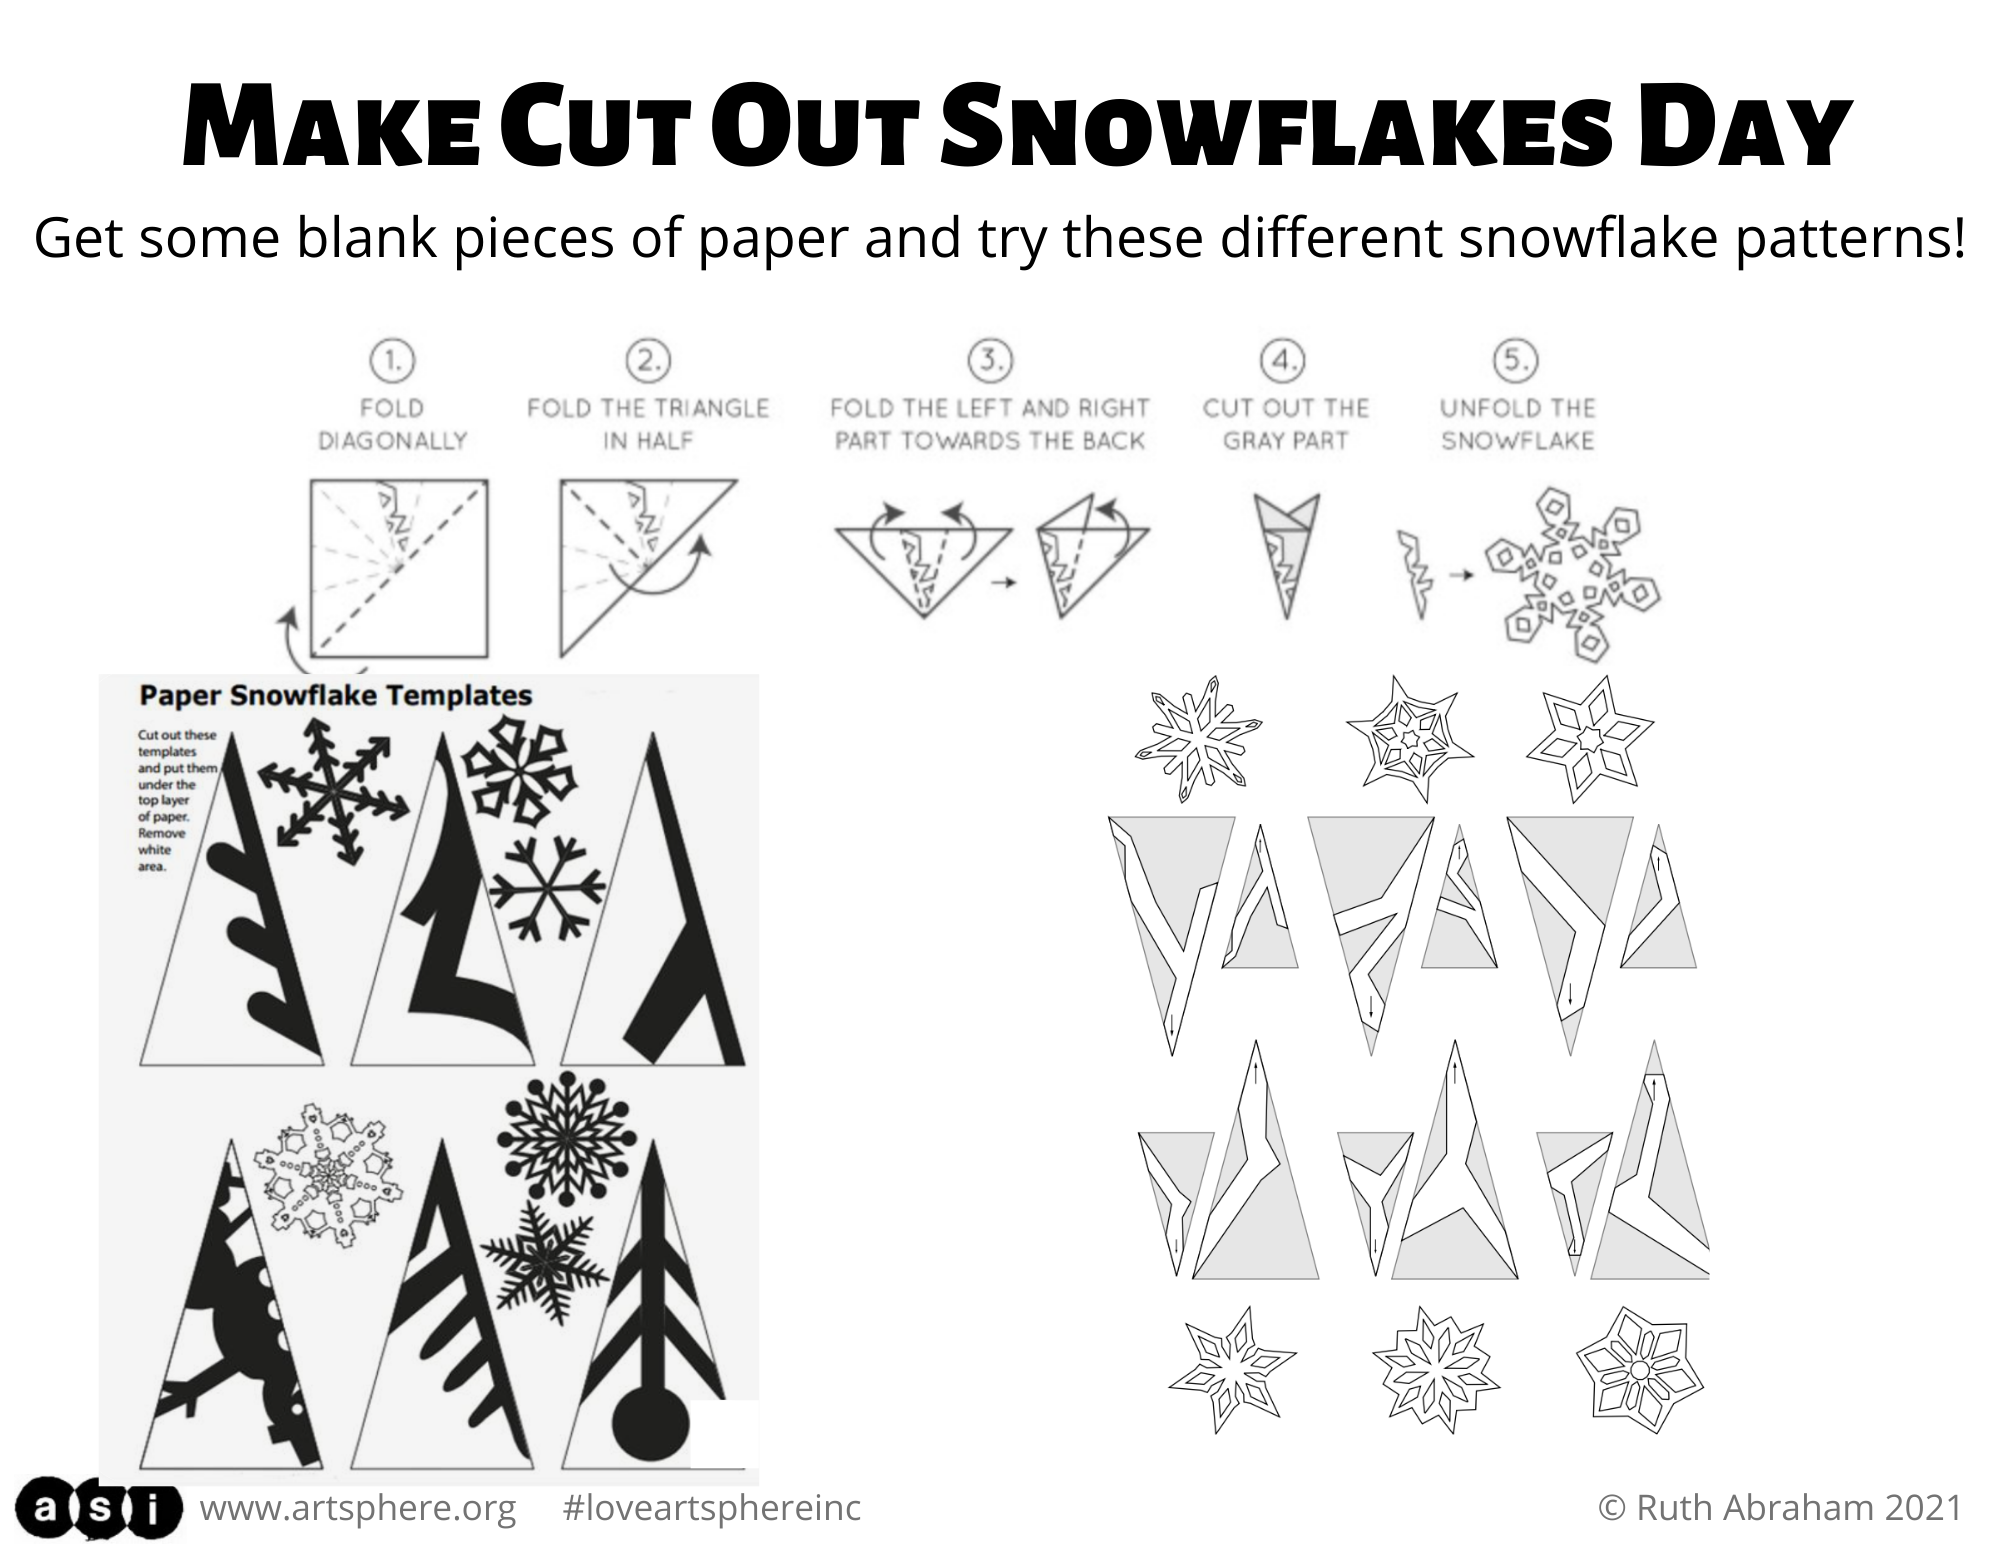 Make Cut Out Snowflakes Day Art Sphere Inc